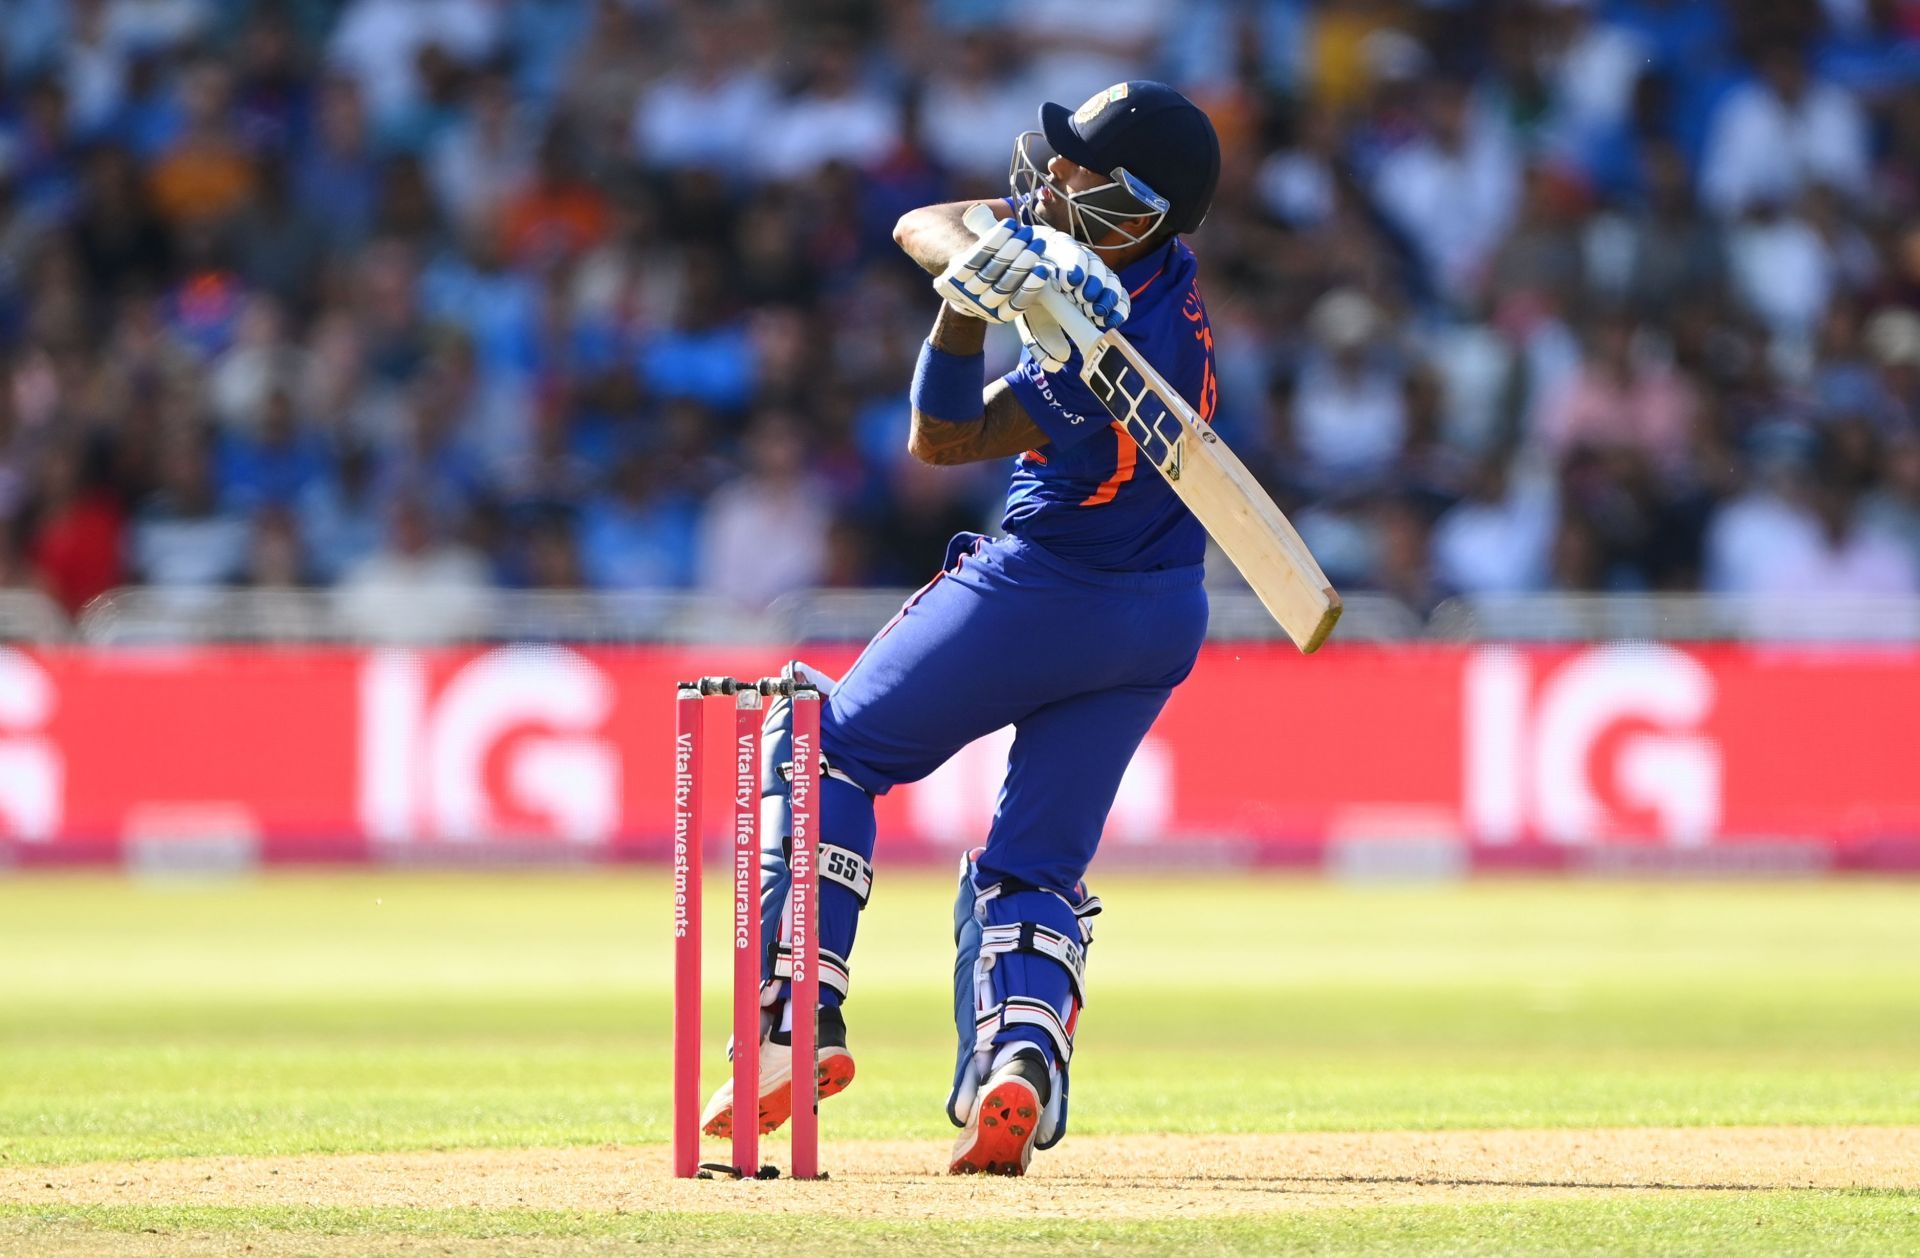 Suryakumar Yadav batted at No. 5 in the ODI series against England